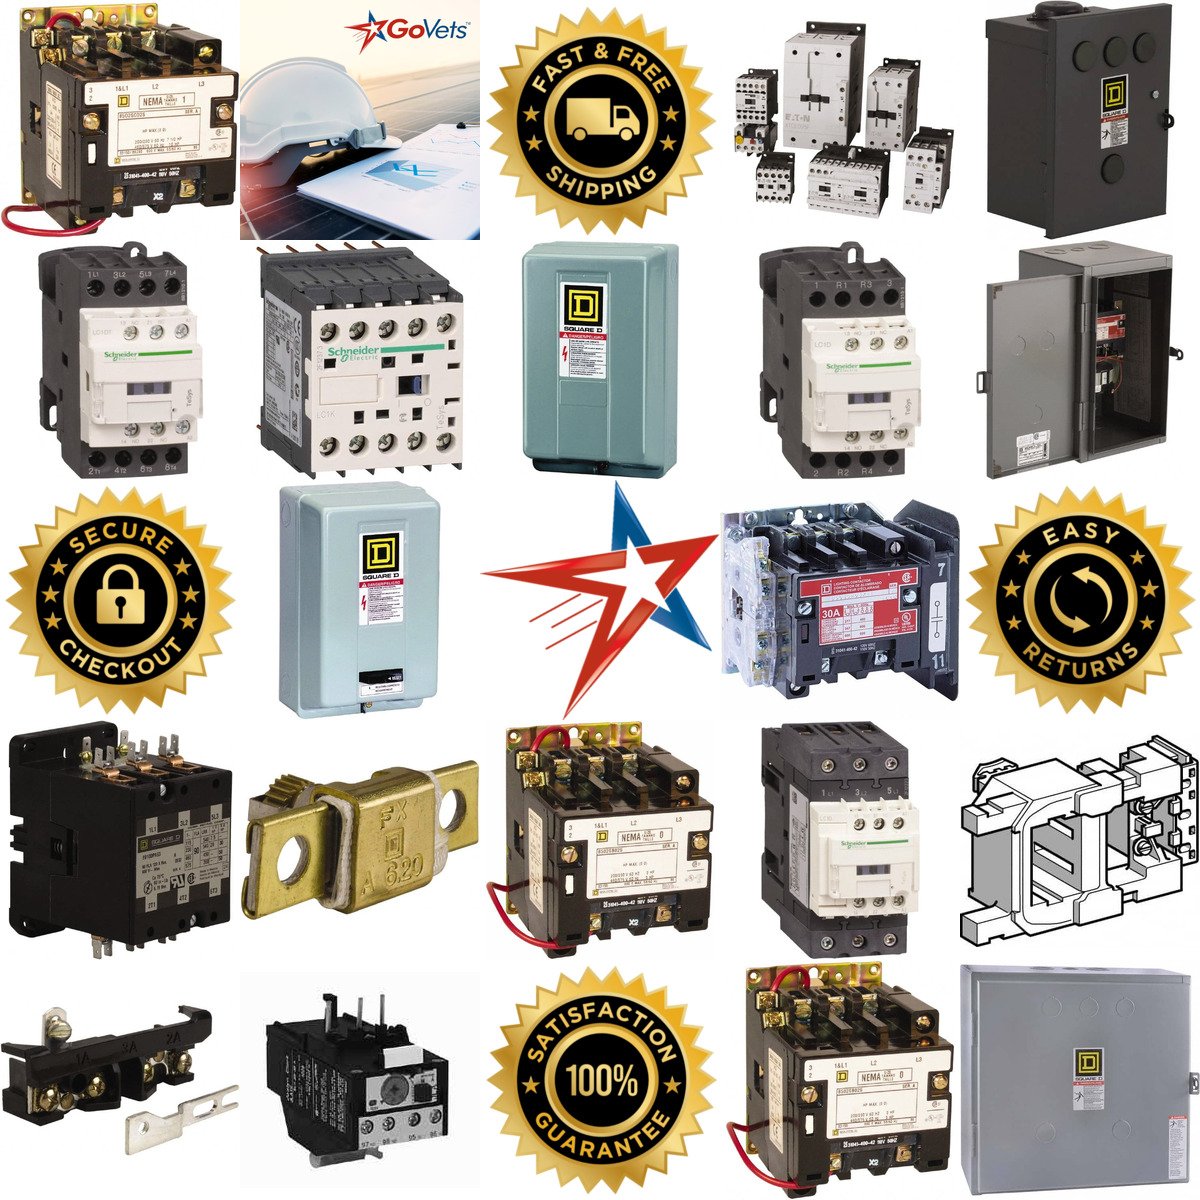 A selection of Contactors products on GoVets